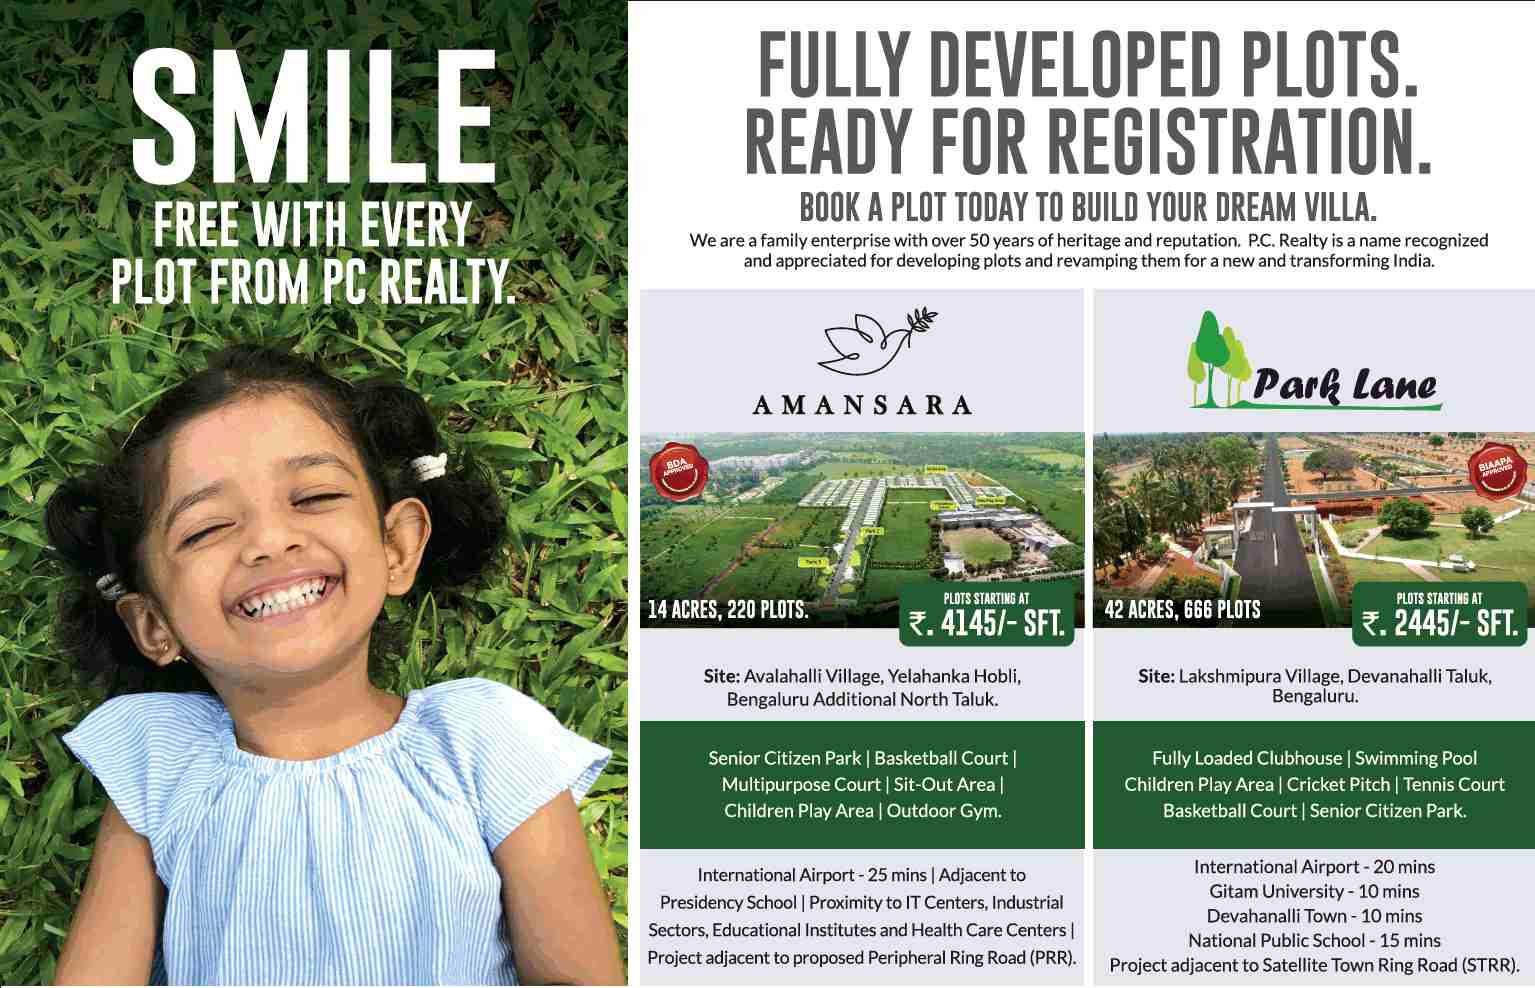 Book a plot today to build your dream villa at PC Realty Properties in Bangalore Update